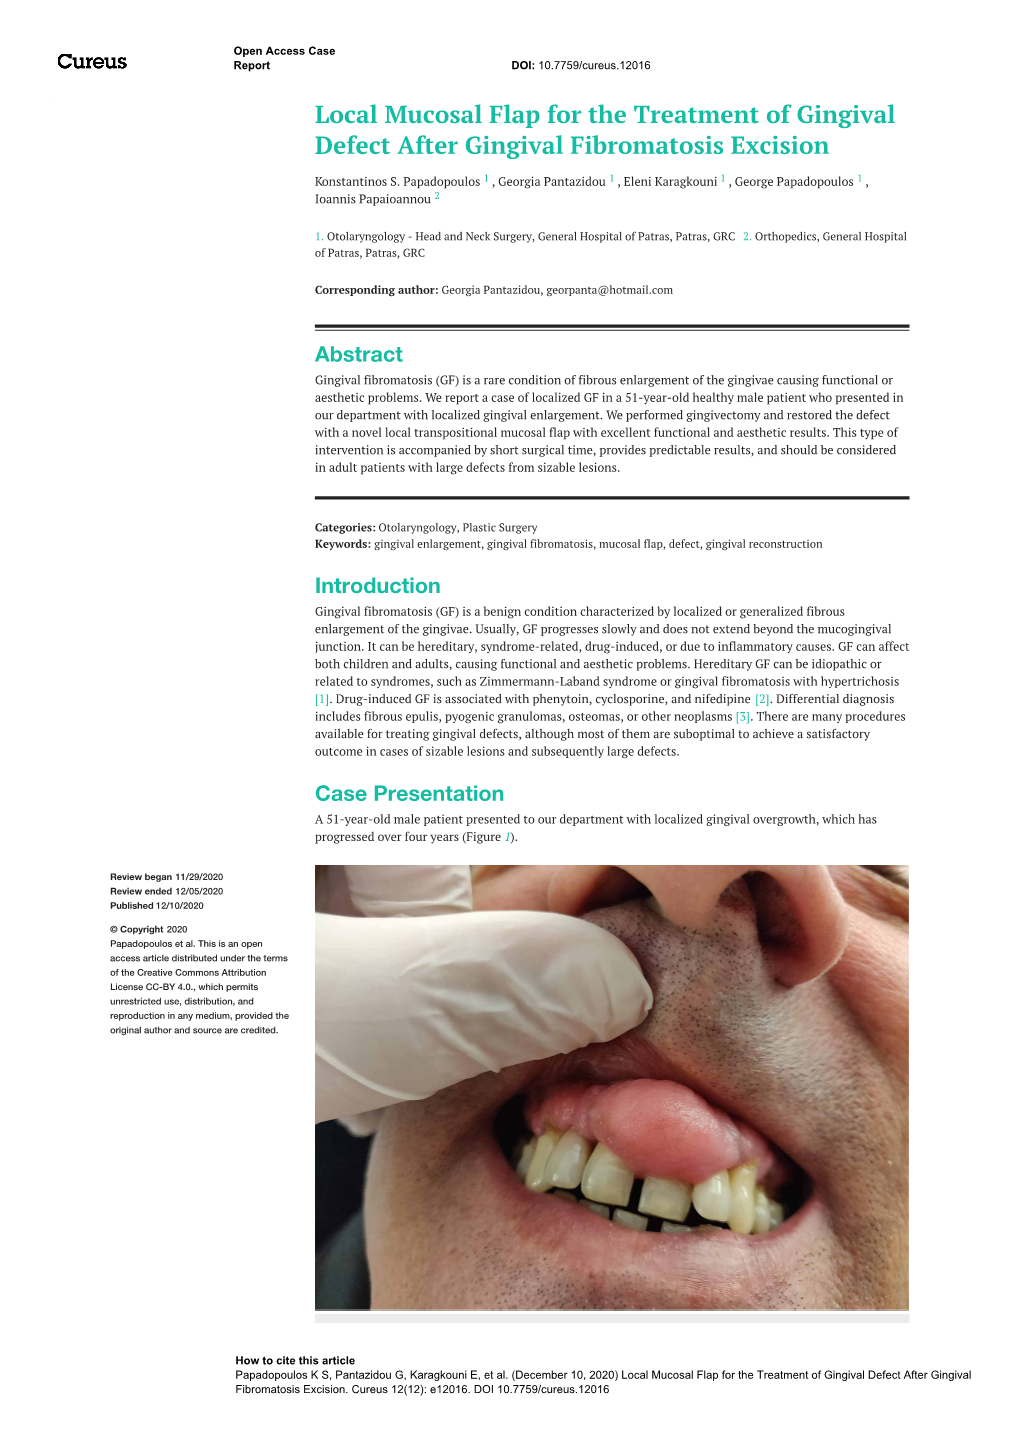 Local Mucosal Flap for the Treatment of Gingival Defect After Gingival Fibromatosis Excision